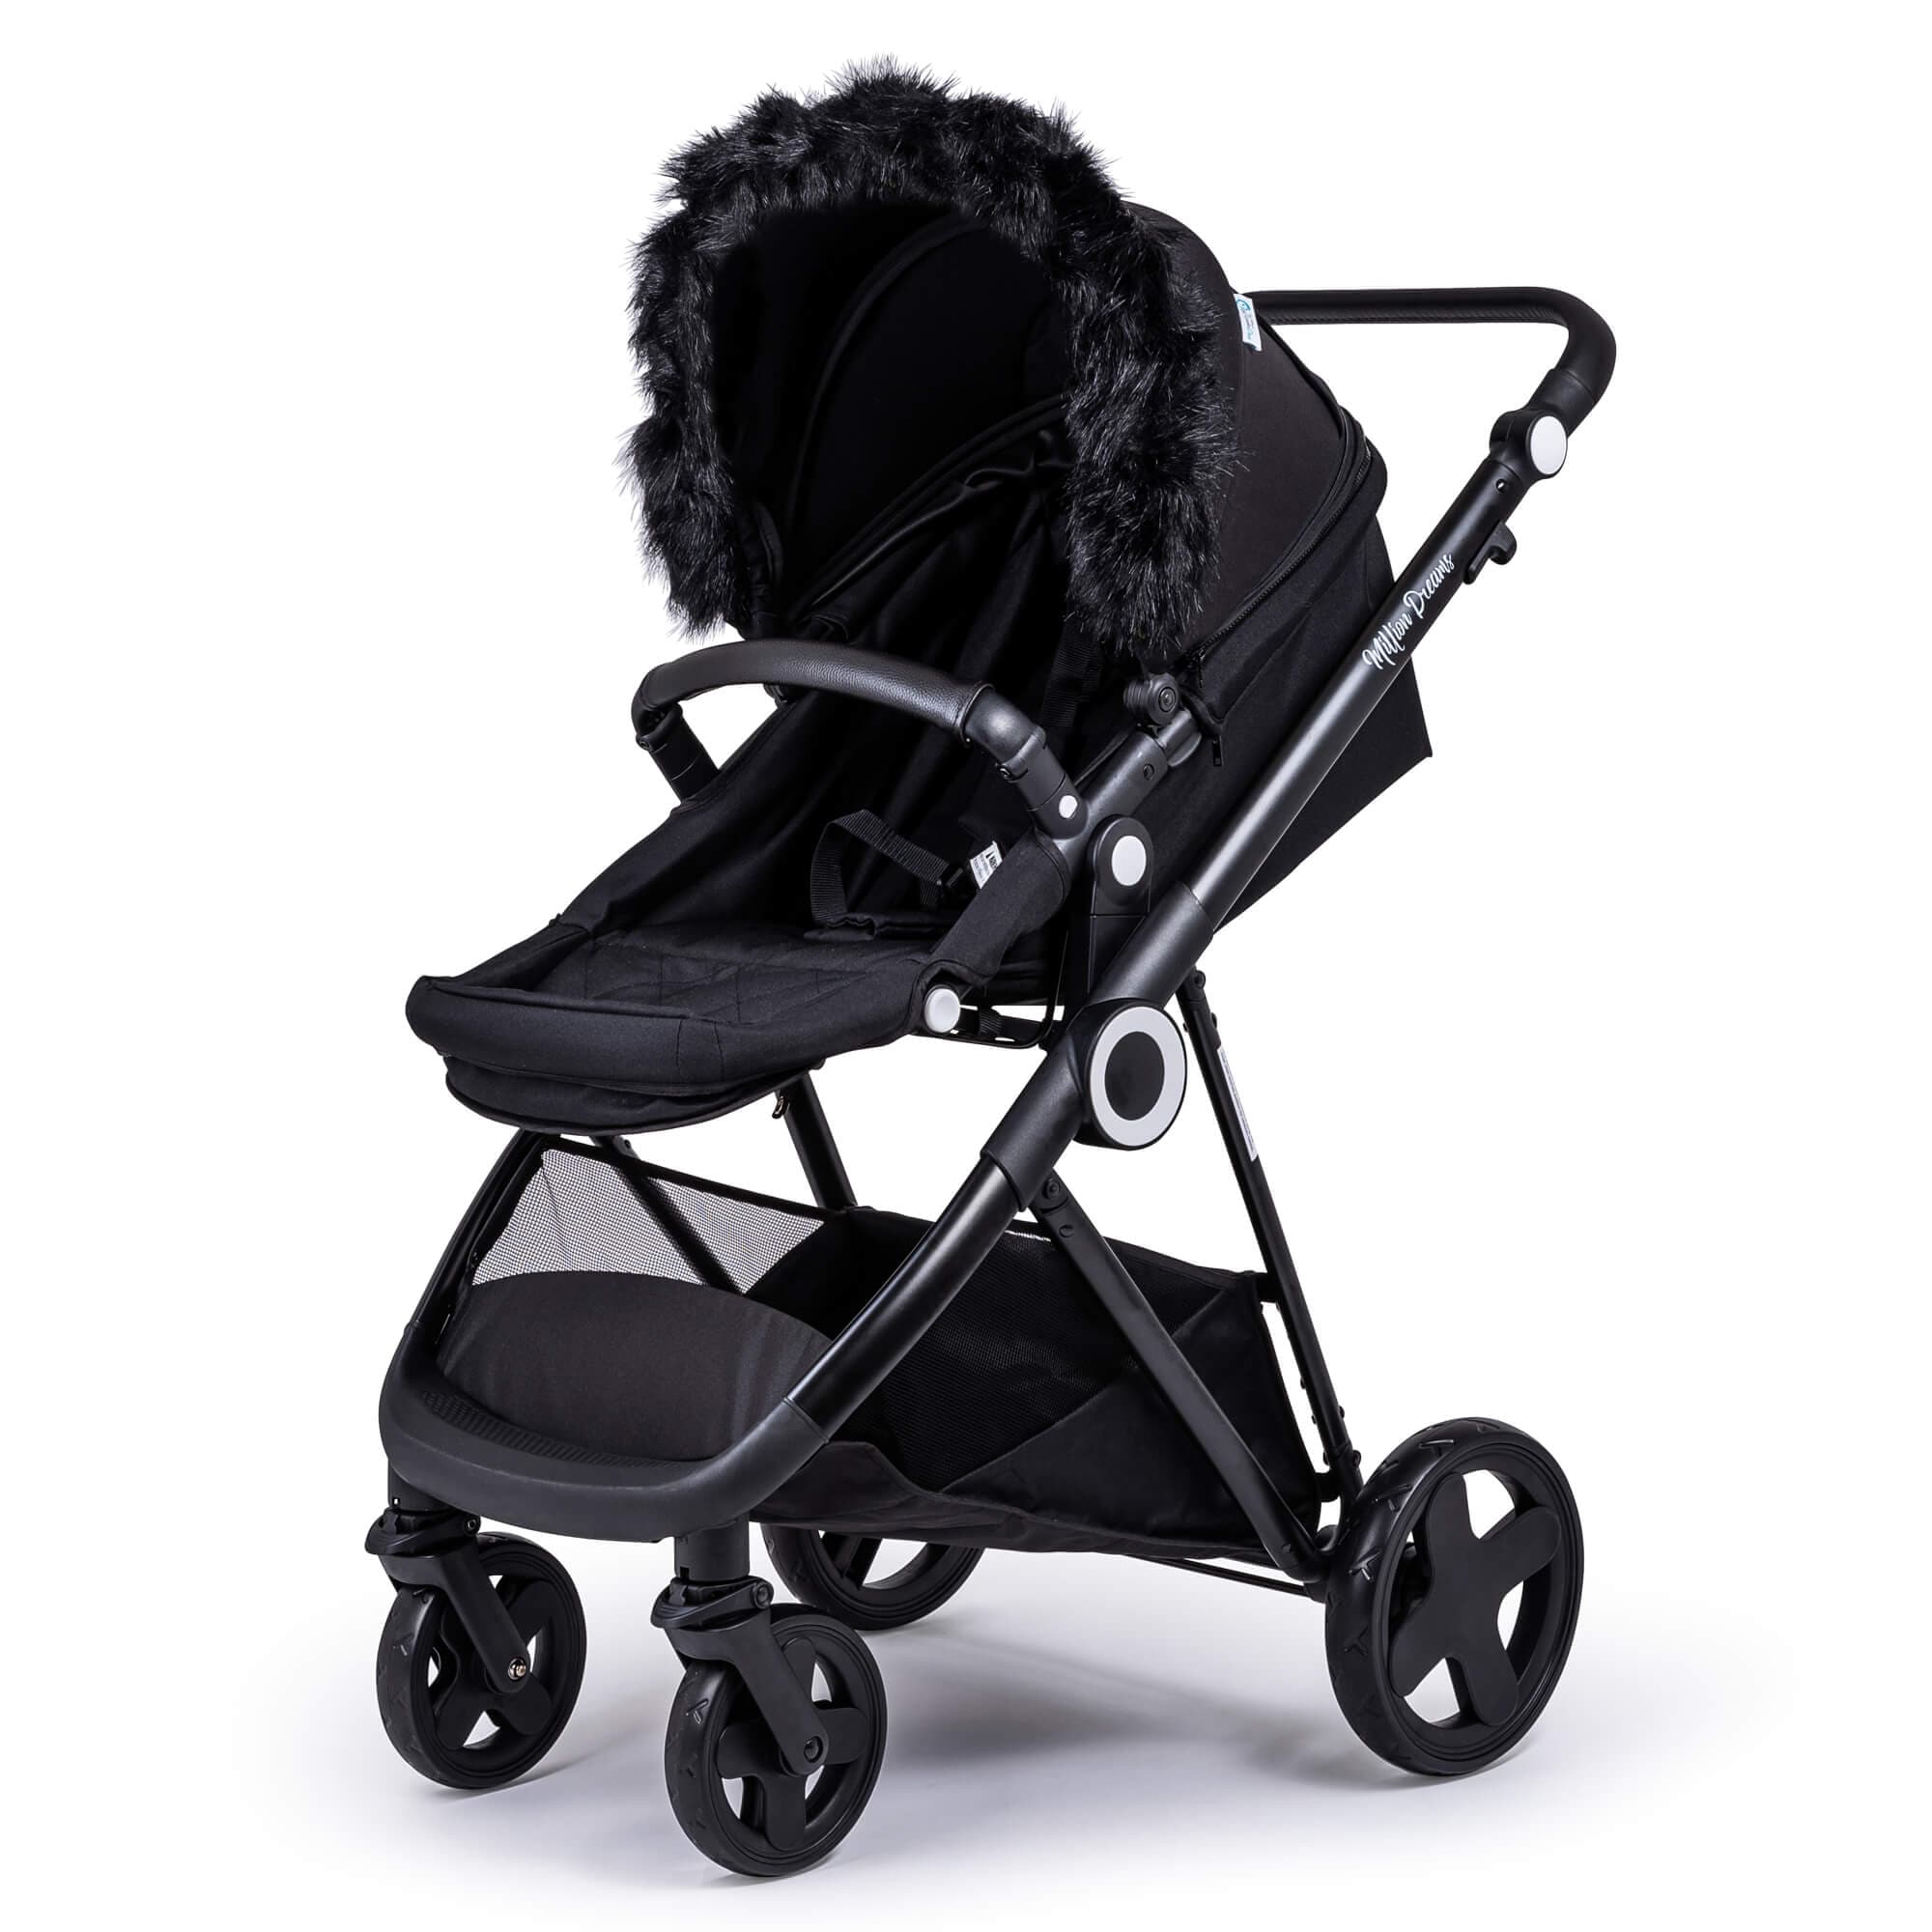 Pram Fur Hood Trim Attachment for Pushchair Compatible with Cybex - For Your Little One